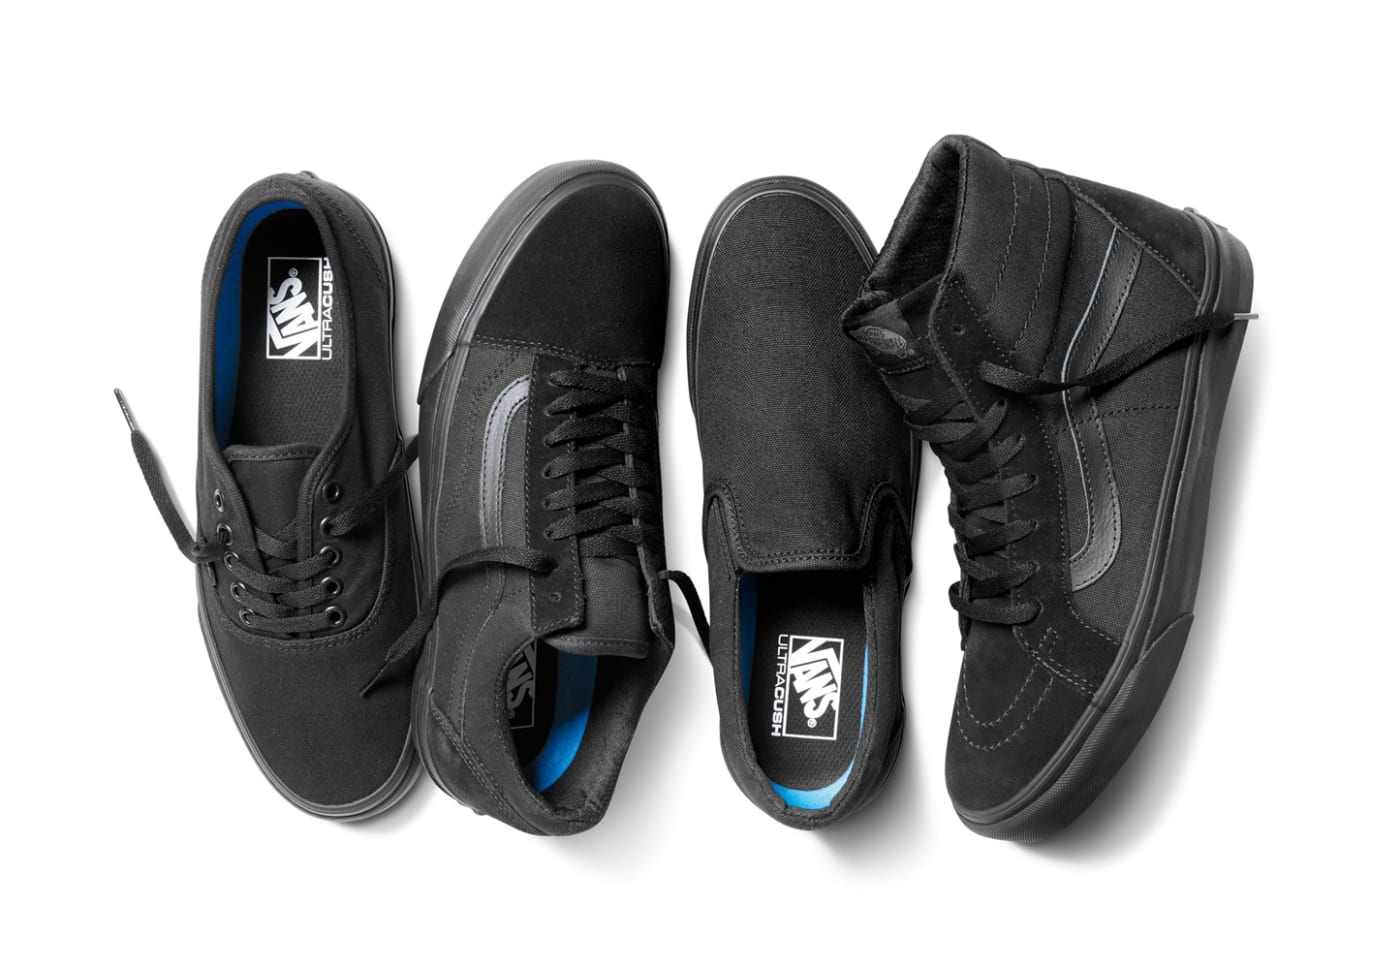 Vans 'Made the Collection Is Built Maximise Comfort and Durability | Complex UK